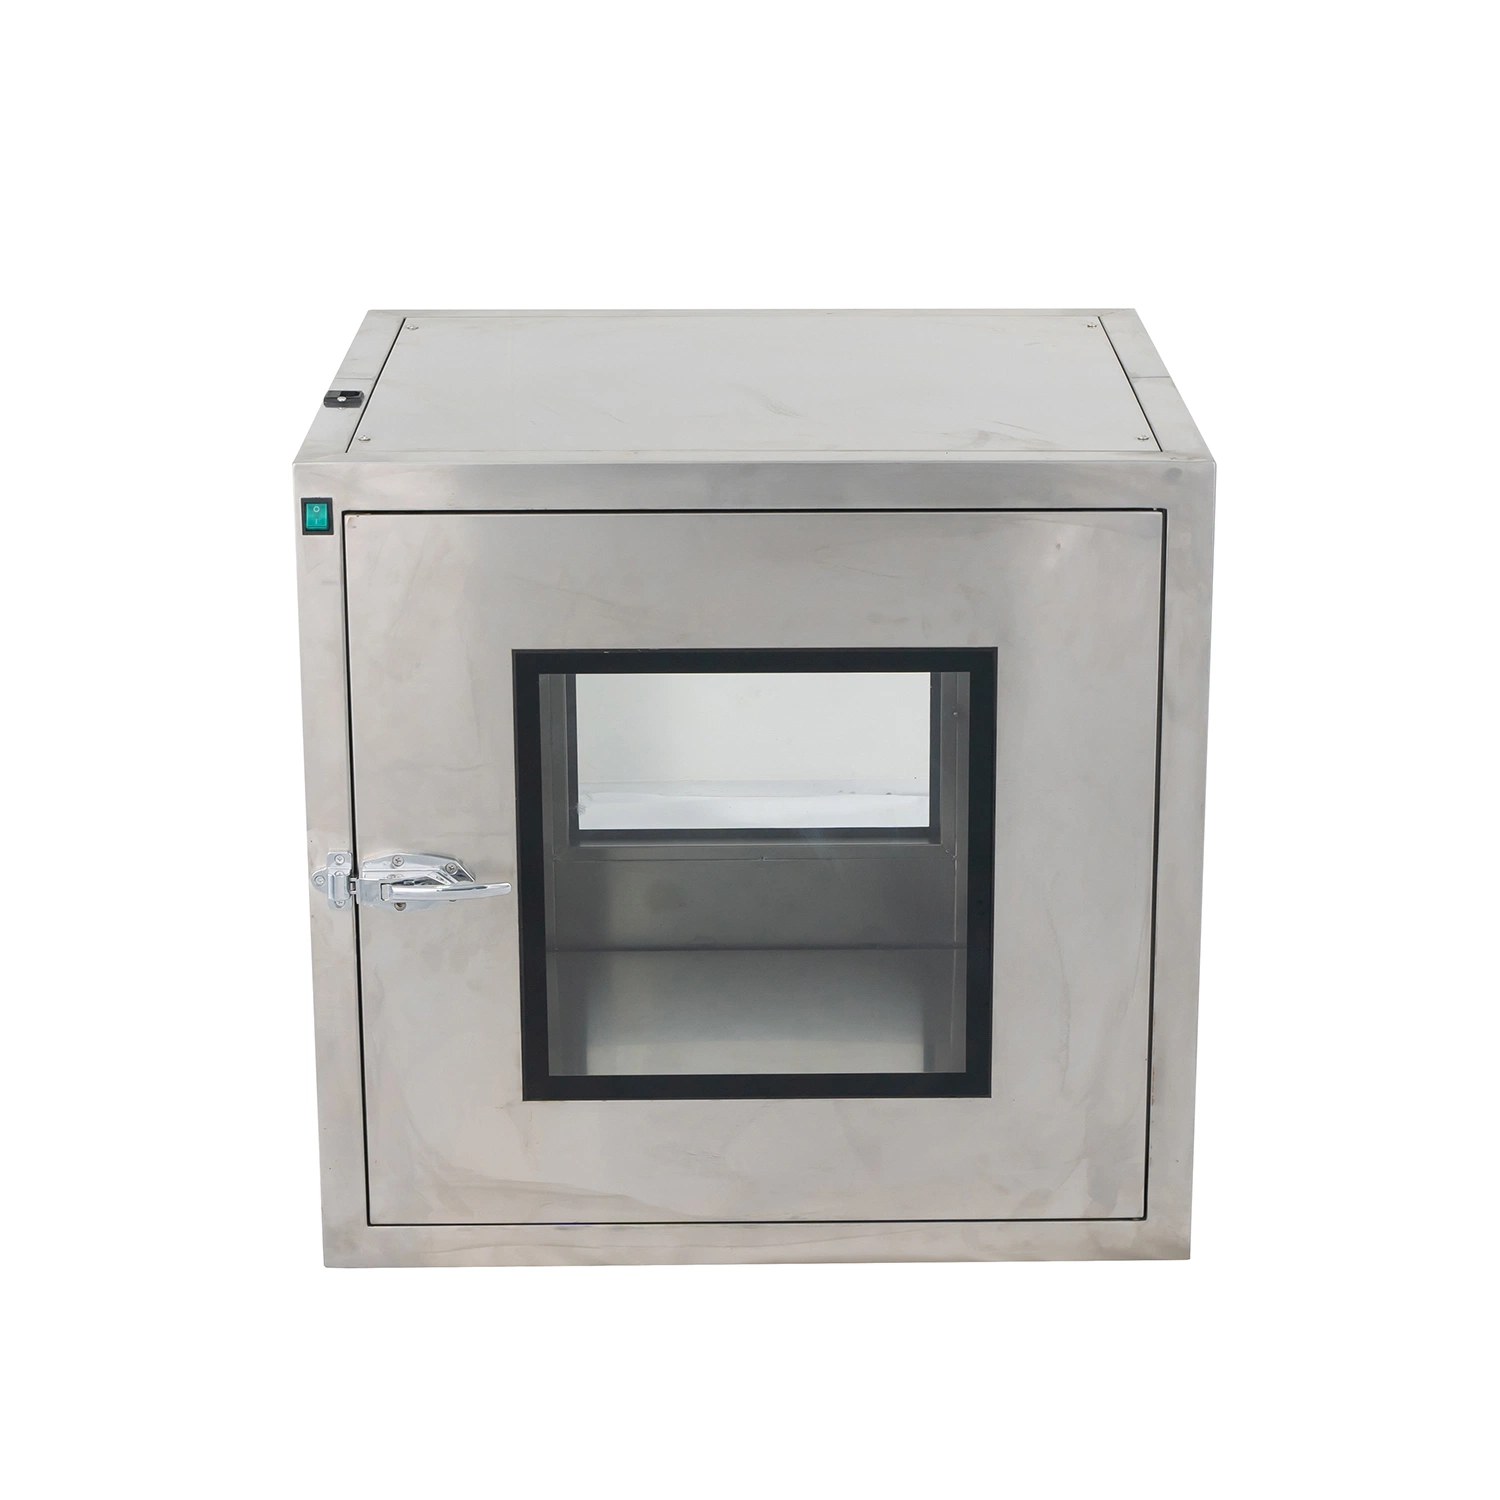 Through Electrical Stainless Steel Transfer Window Pass Box for Clean Room